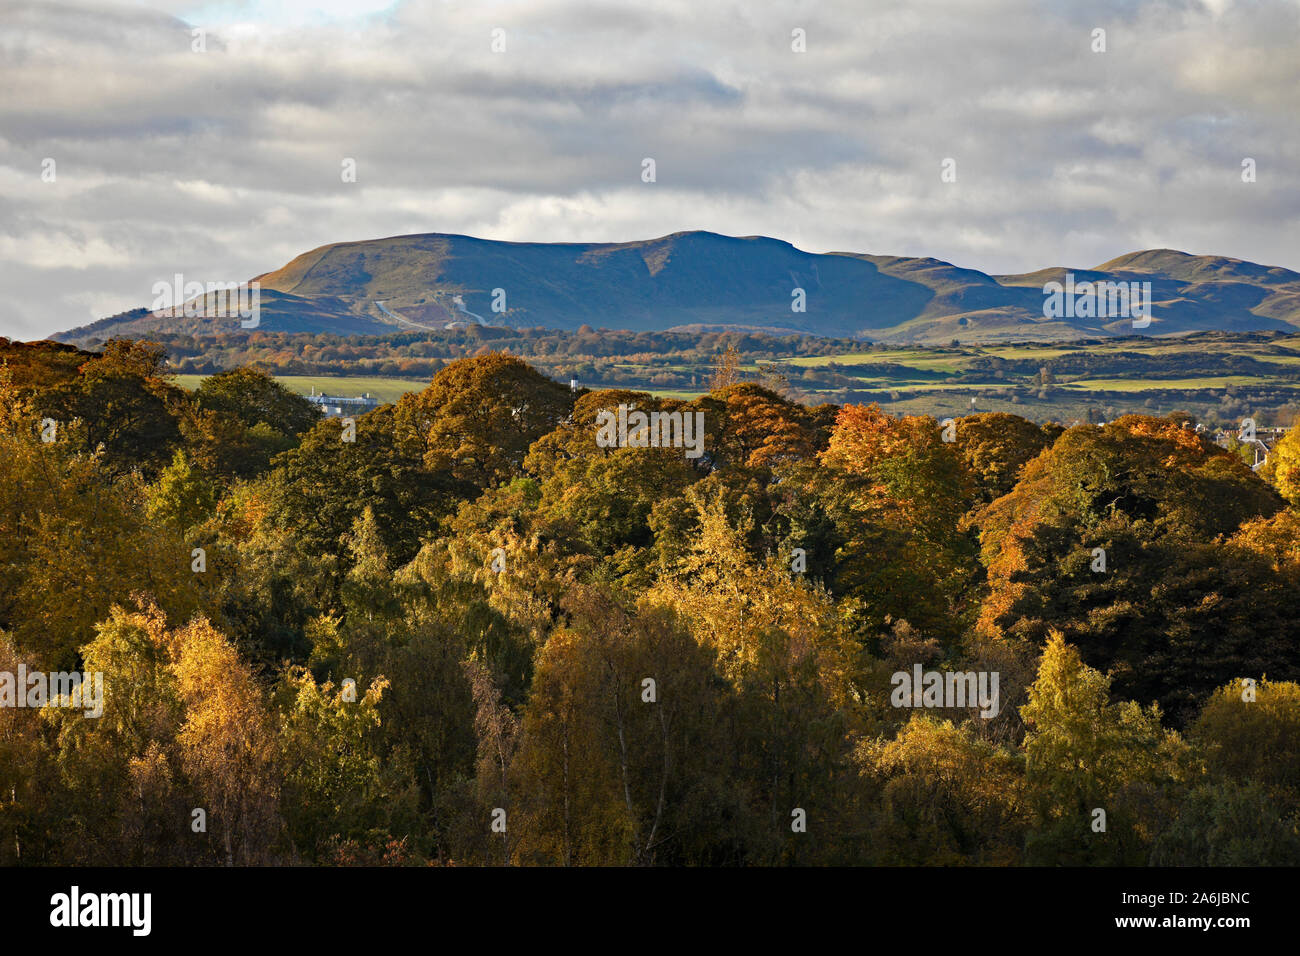 Pentland Hills in background with autumnal foliage on the trees in foreground, Edinburgh, Scotland, UK Stock Photo